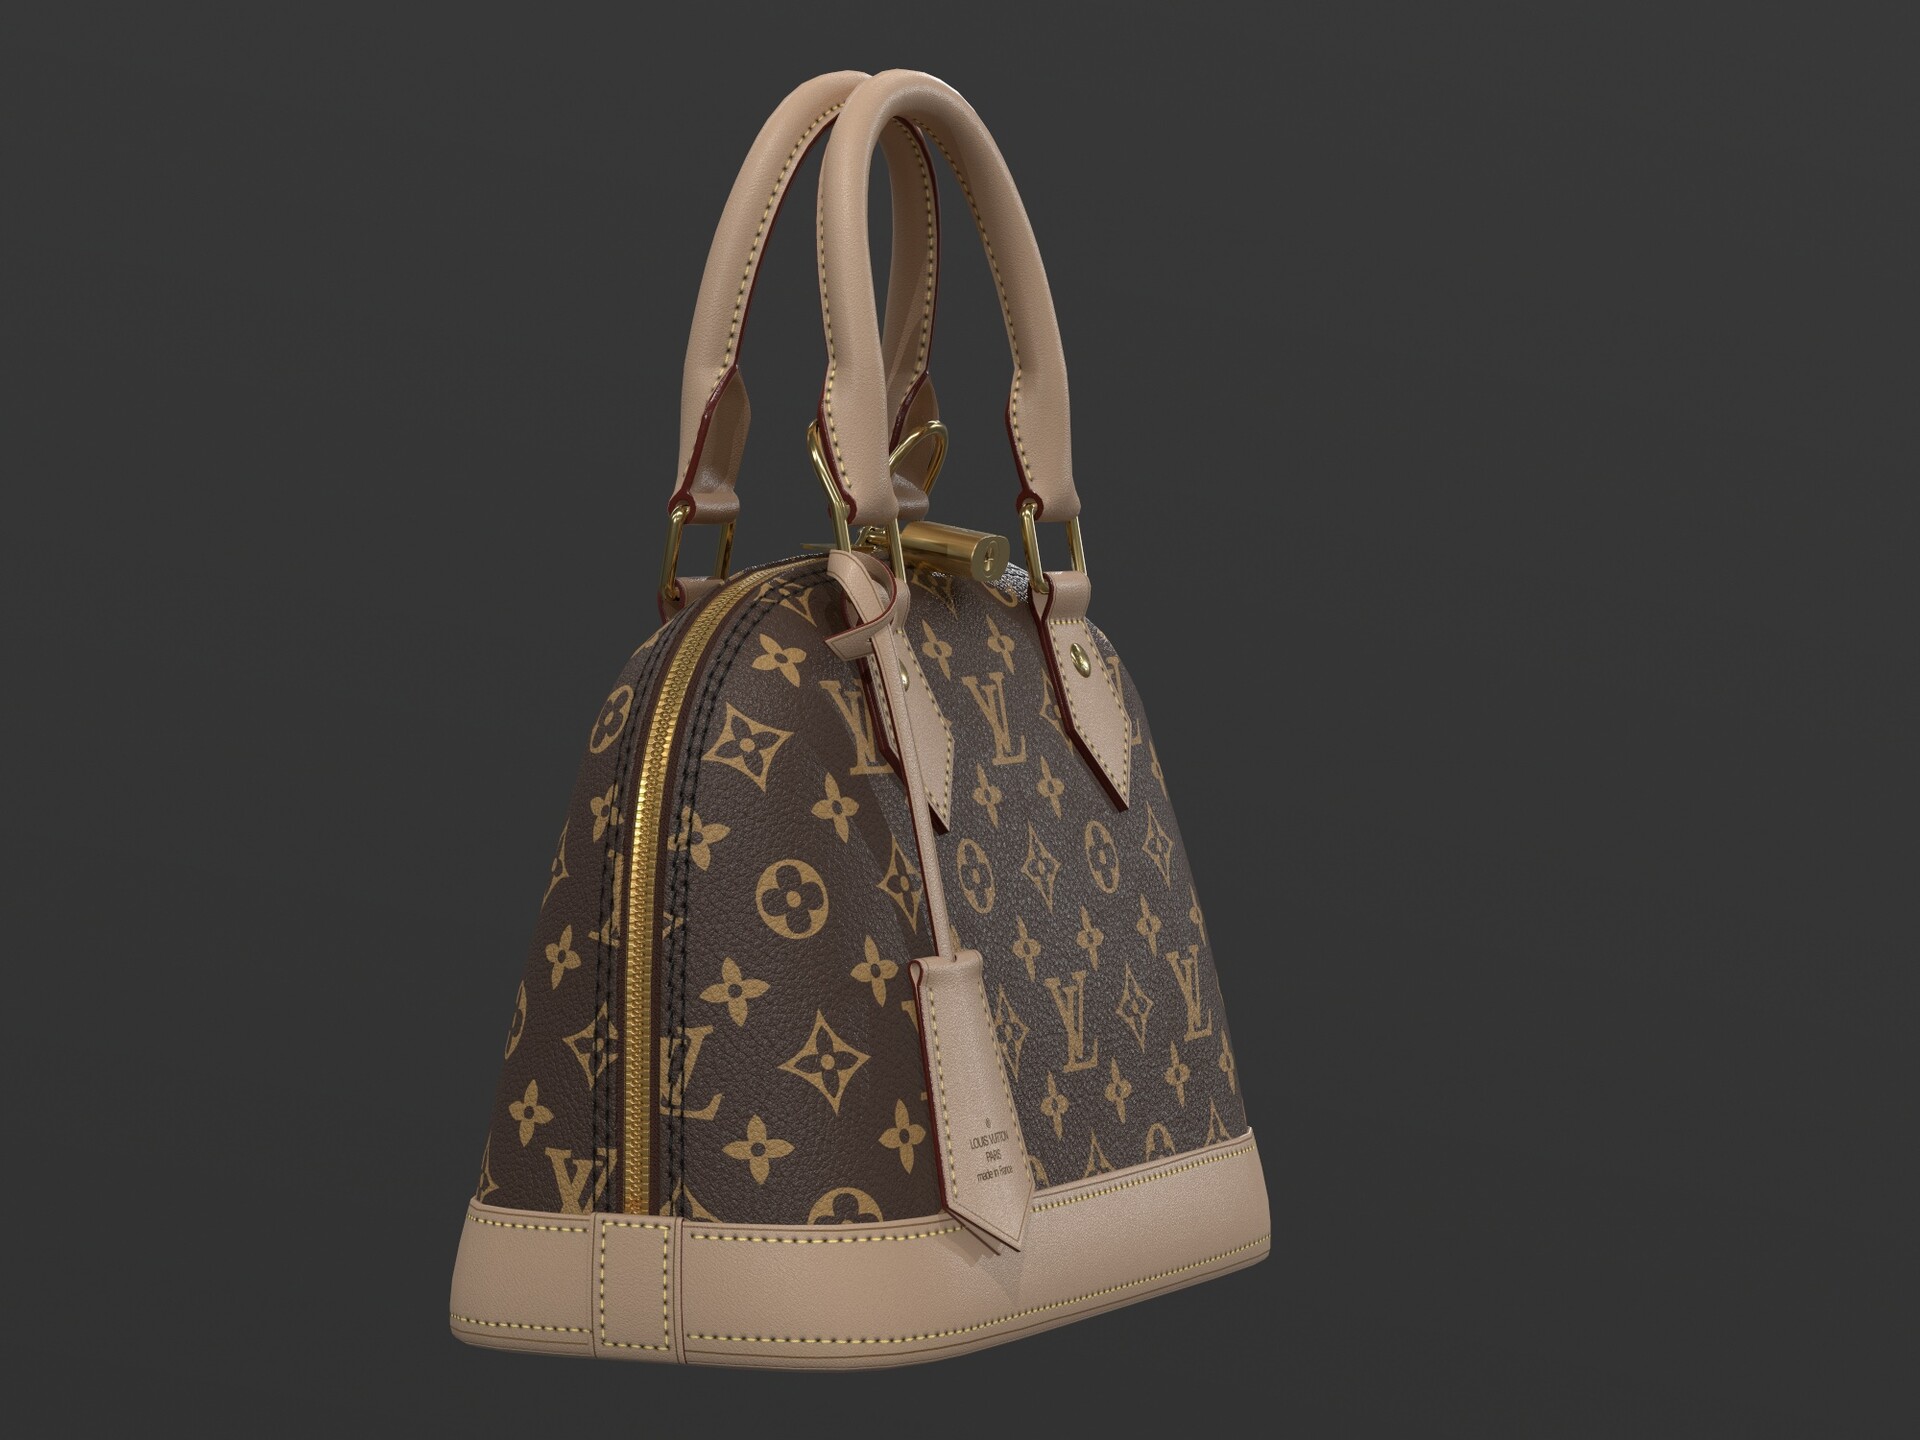 3D model Louis Vuitton Alma BB Top Handle Bag in Epi Leather Warm VR / AR /  low-poly